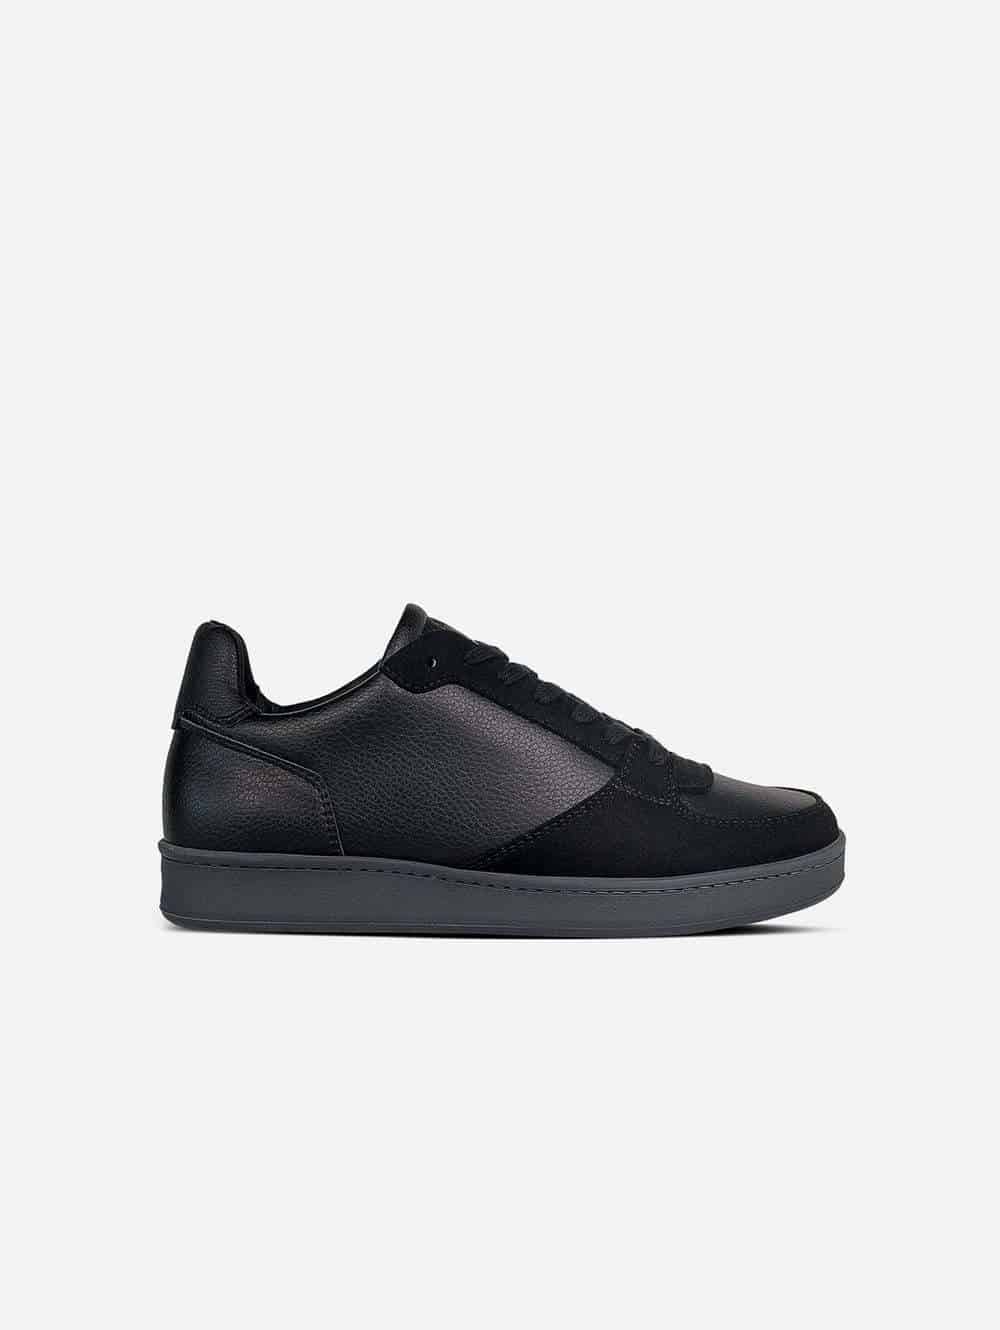 Black vegan leather sneaker with black sole and black laces